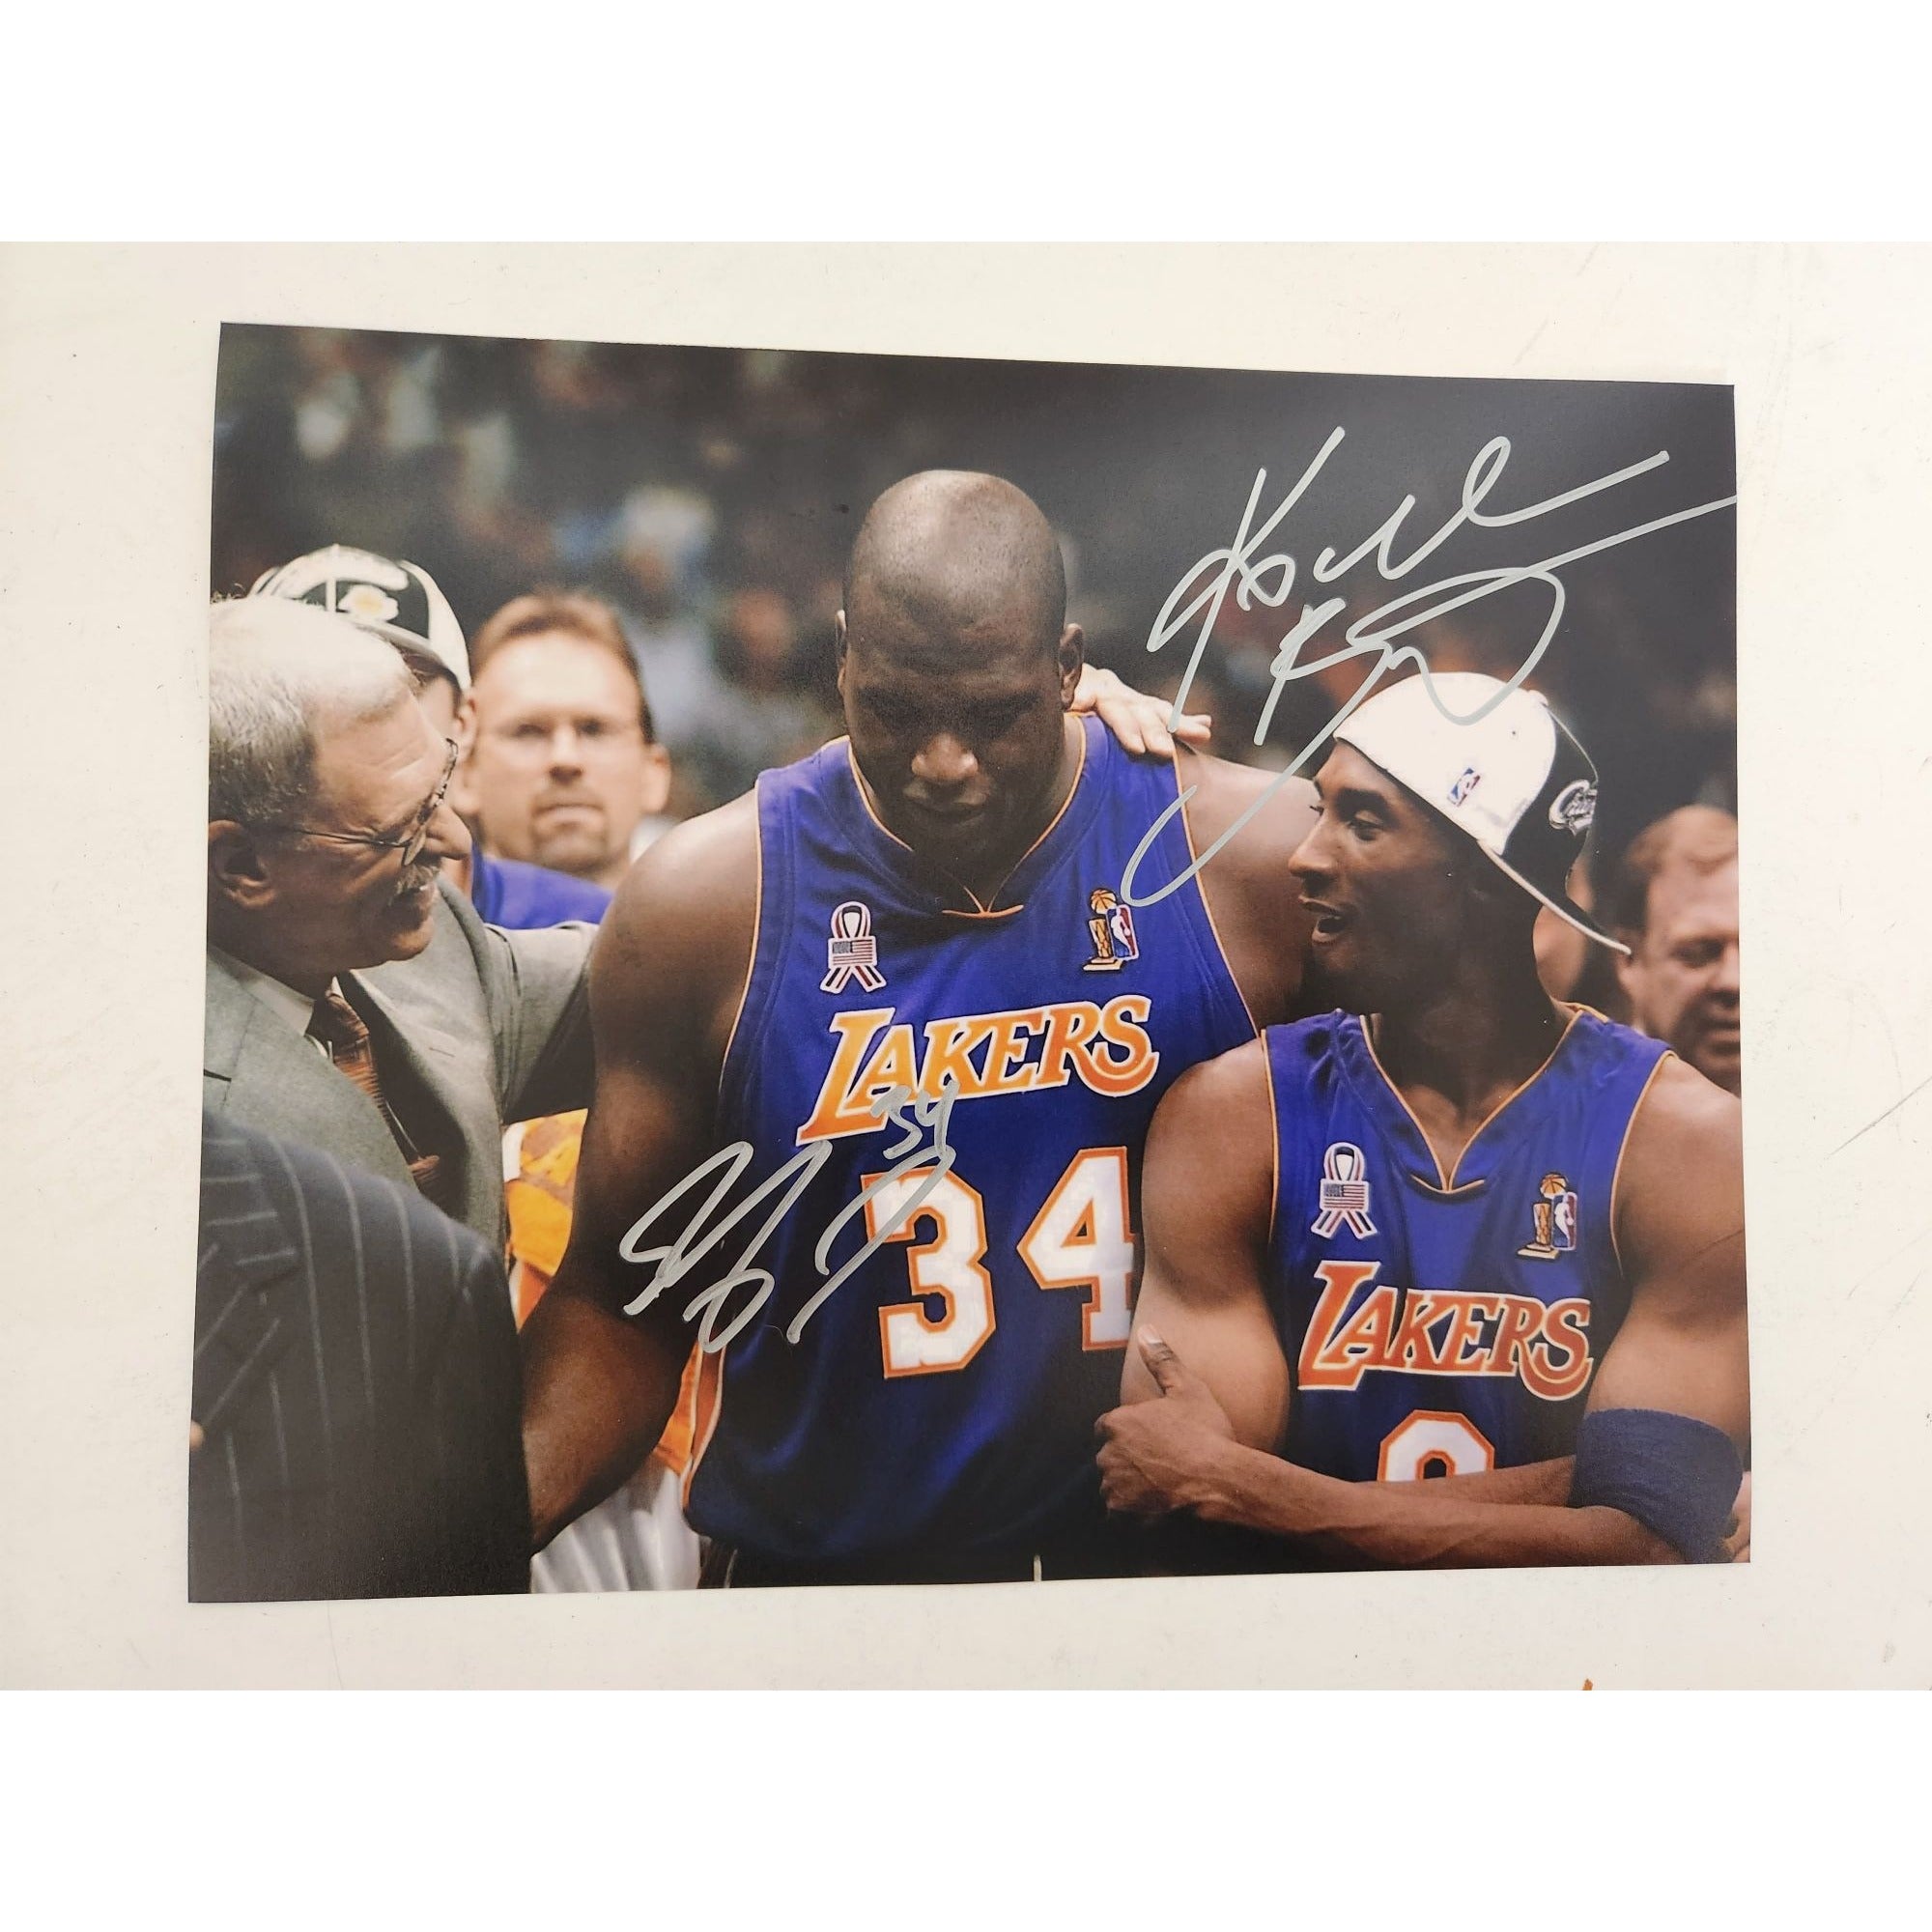 Kobe Bryant Shaquille O'Neal Los Angeles Lakers 8 by 10 photo signed with proof